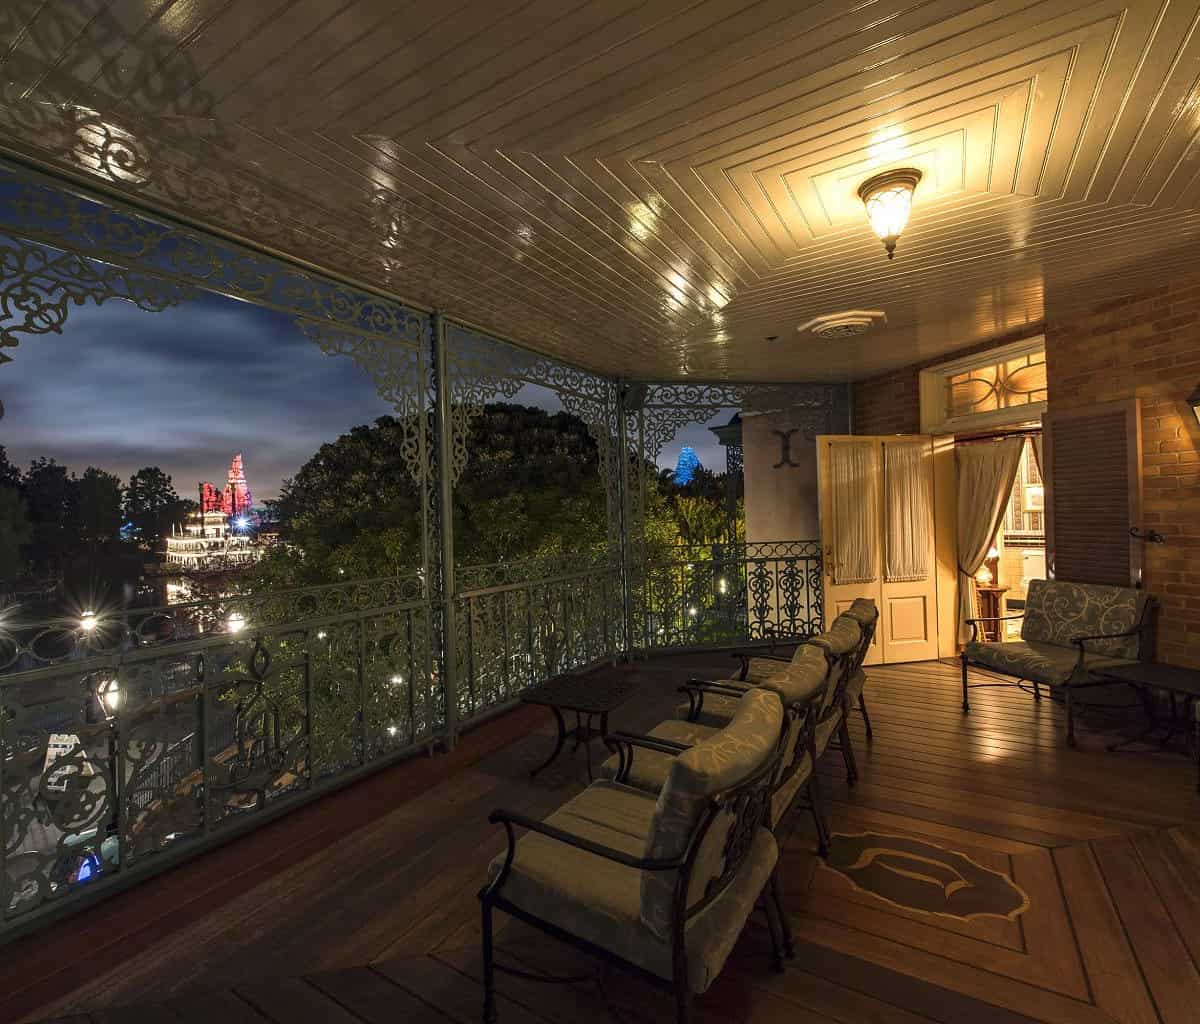 Guests of 21 Royal will end the evening with a grand finale: dessert on the private balcony with a spectacular view of the Rivers of America, and on certain nights, prime viewing of the park’s nighttime entertainment.